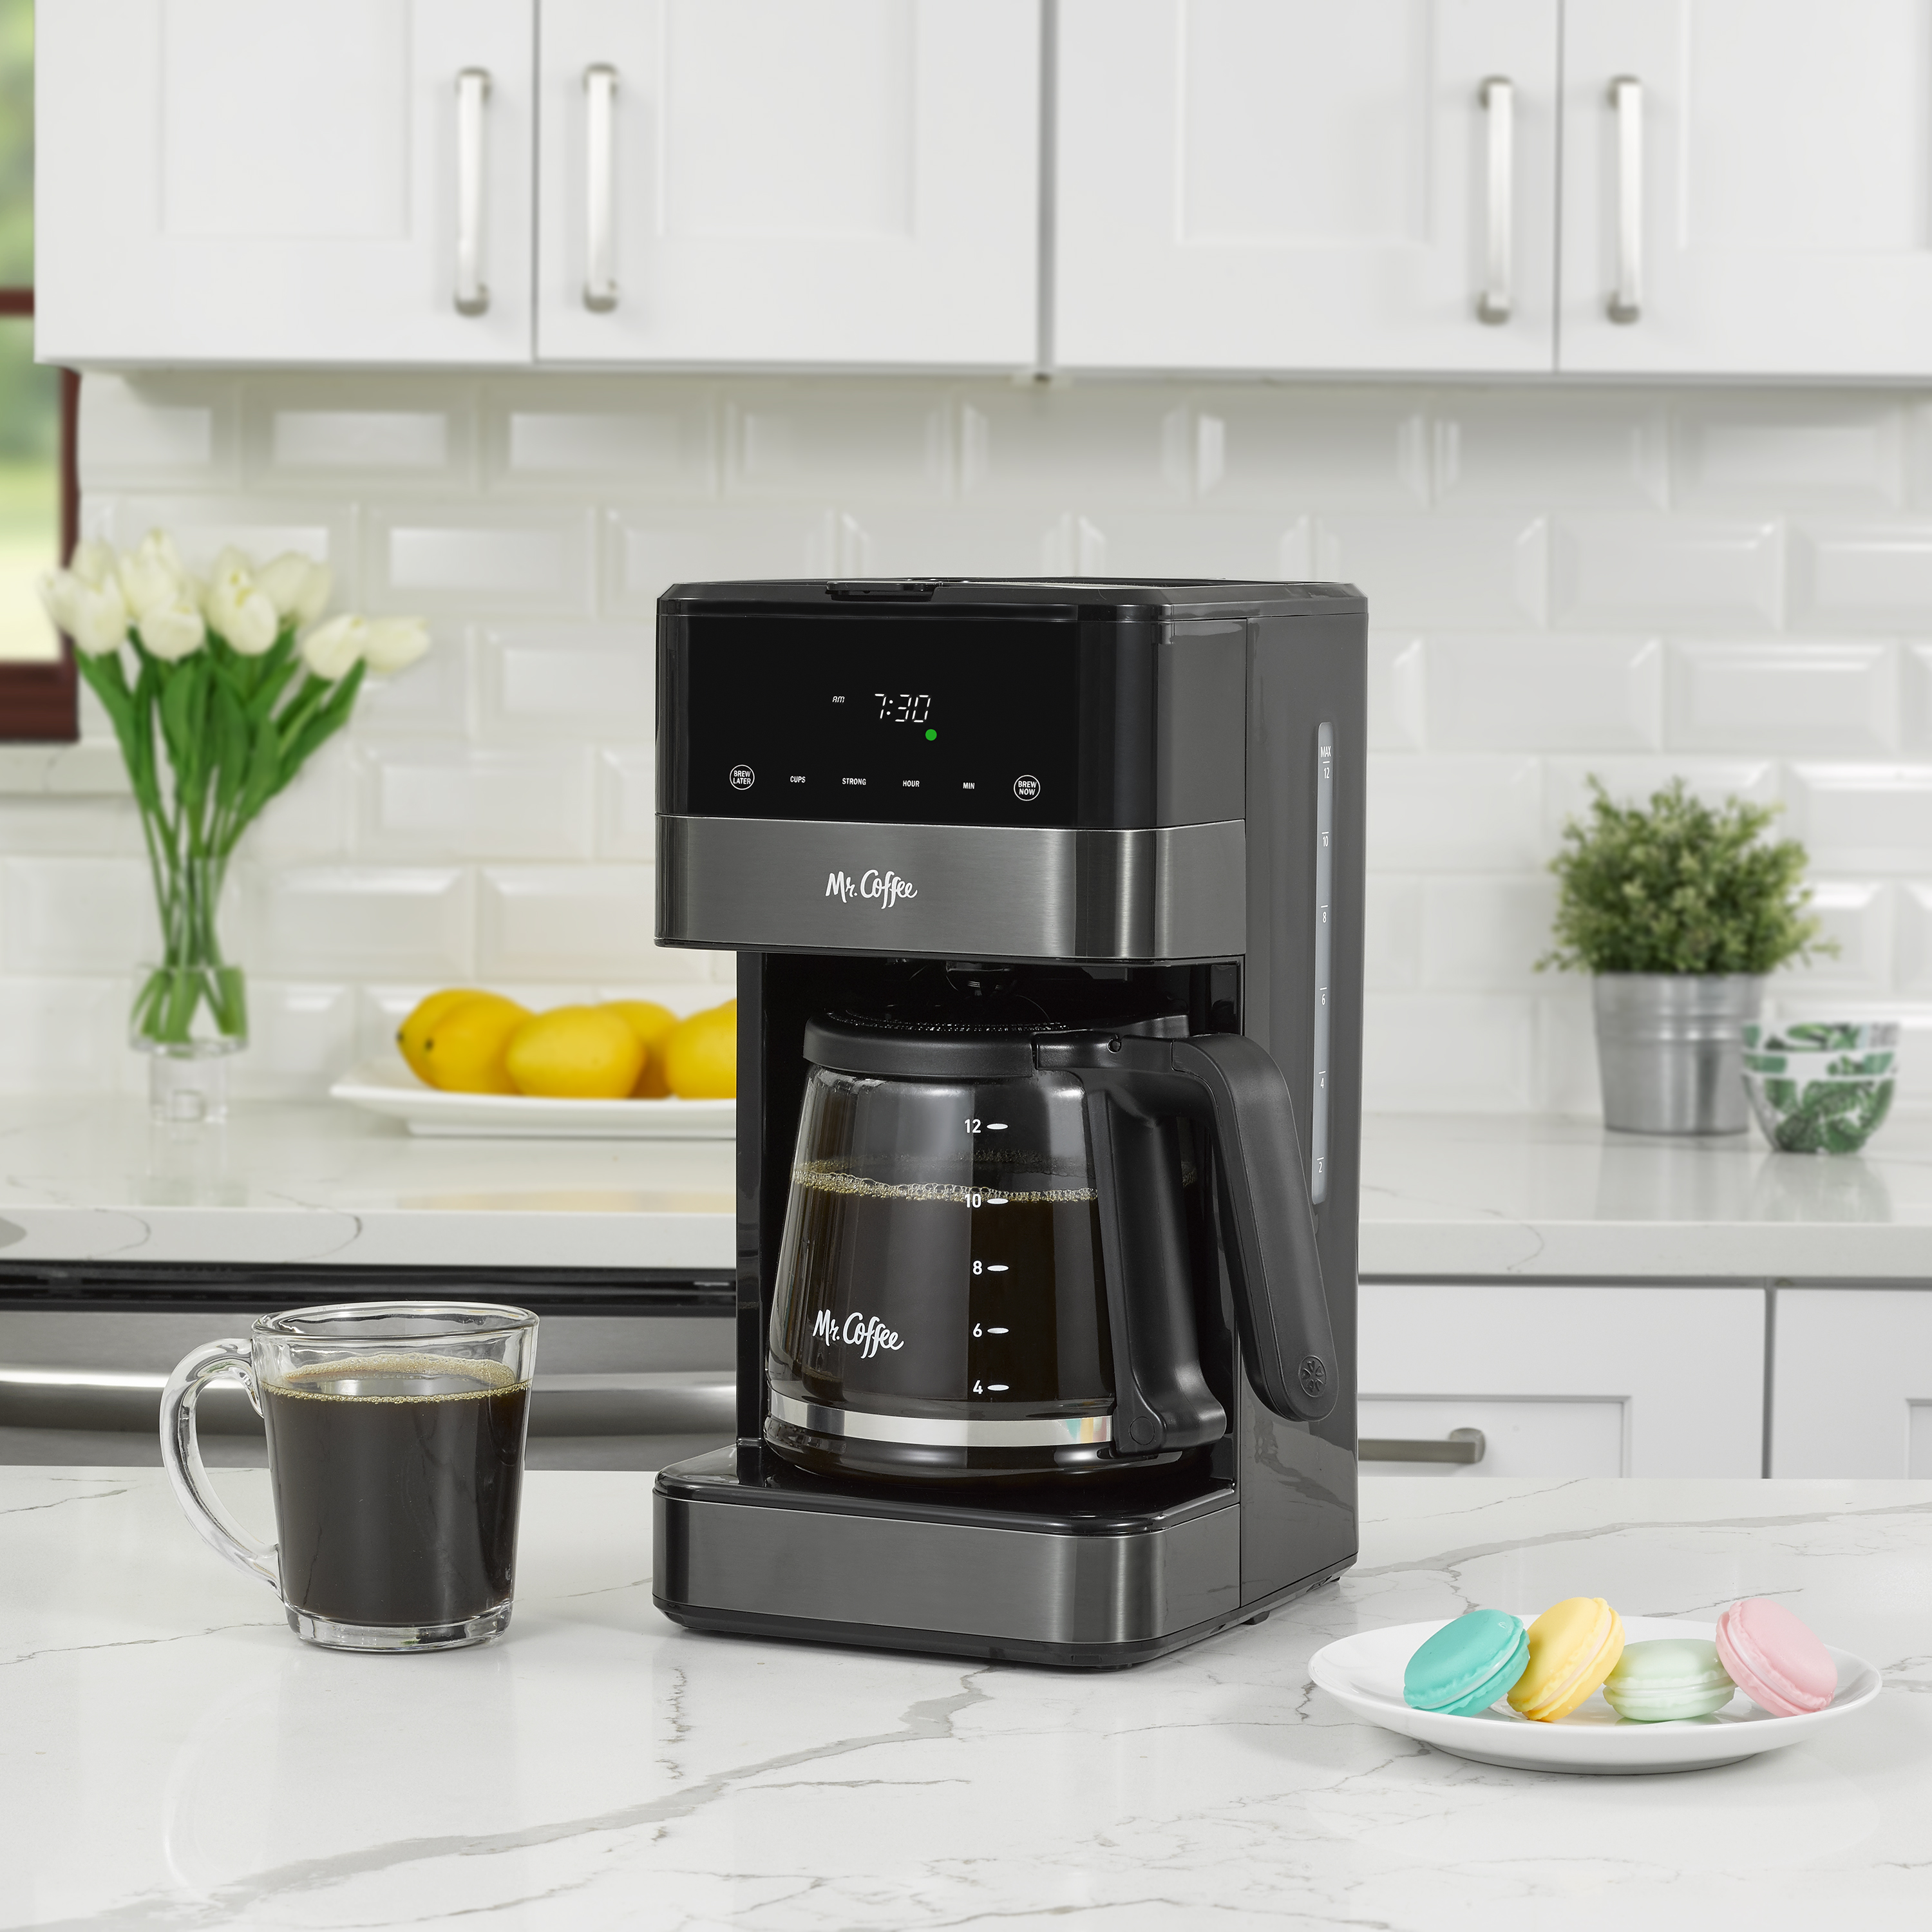 Mr. Coffee 12 Cup Programmable Coffee Maker, LED Touch Display, Black Stainless - image 5 of 9